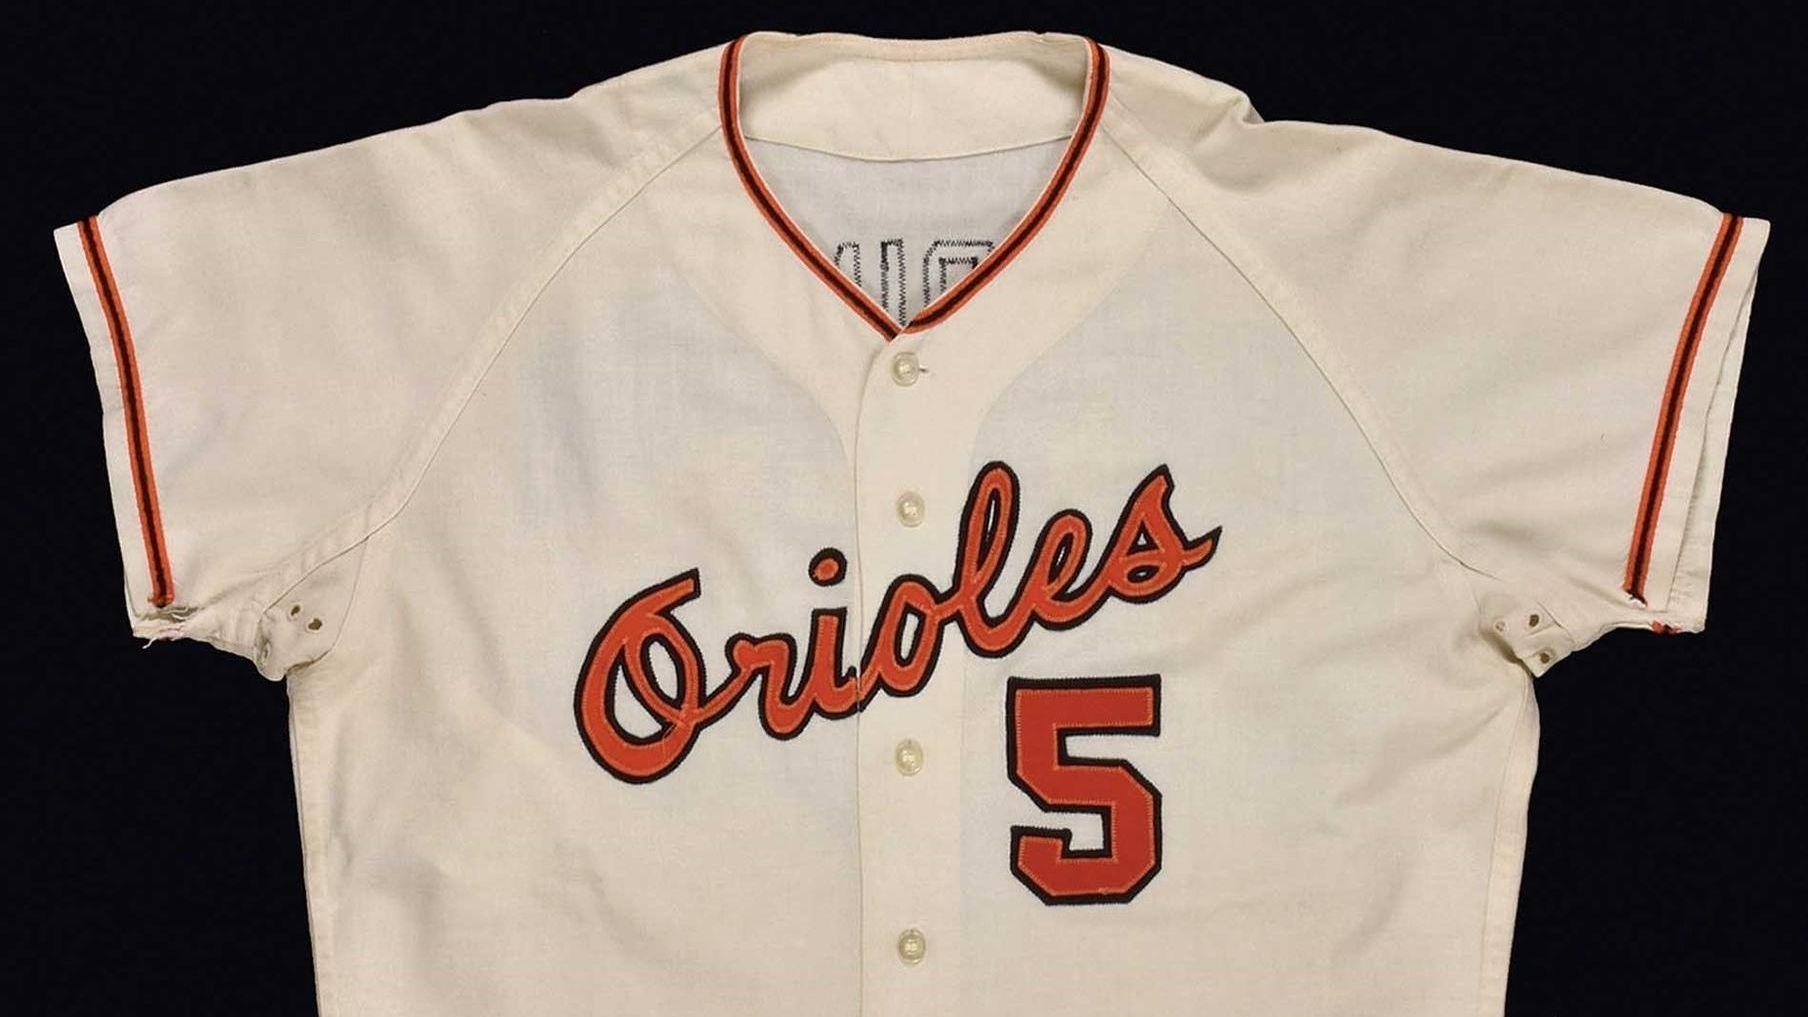 baltimore orioles jersey auction